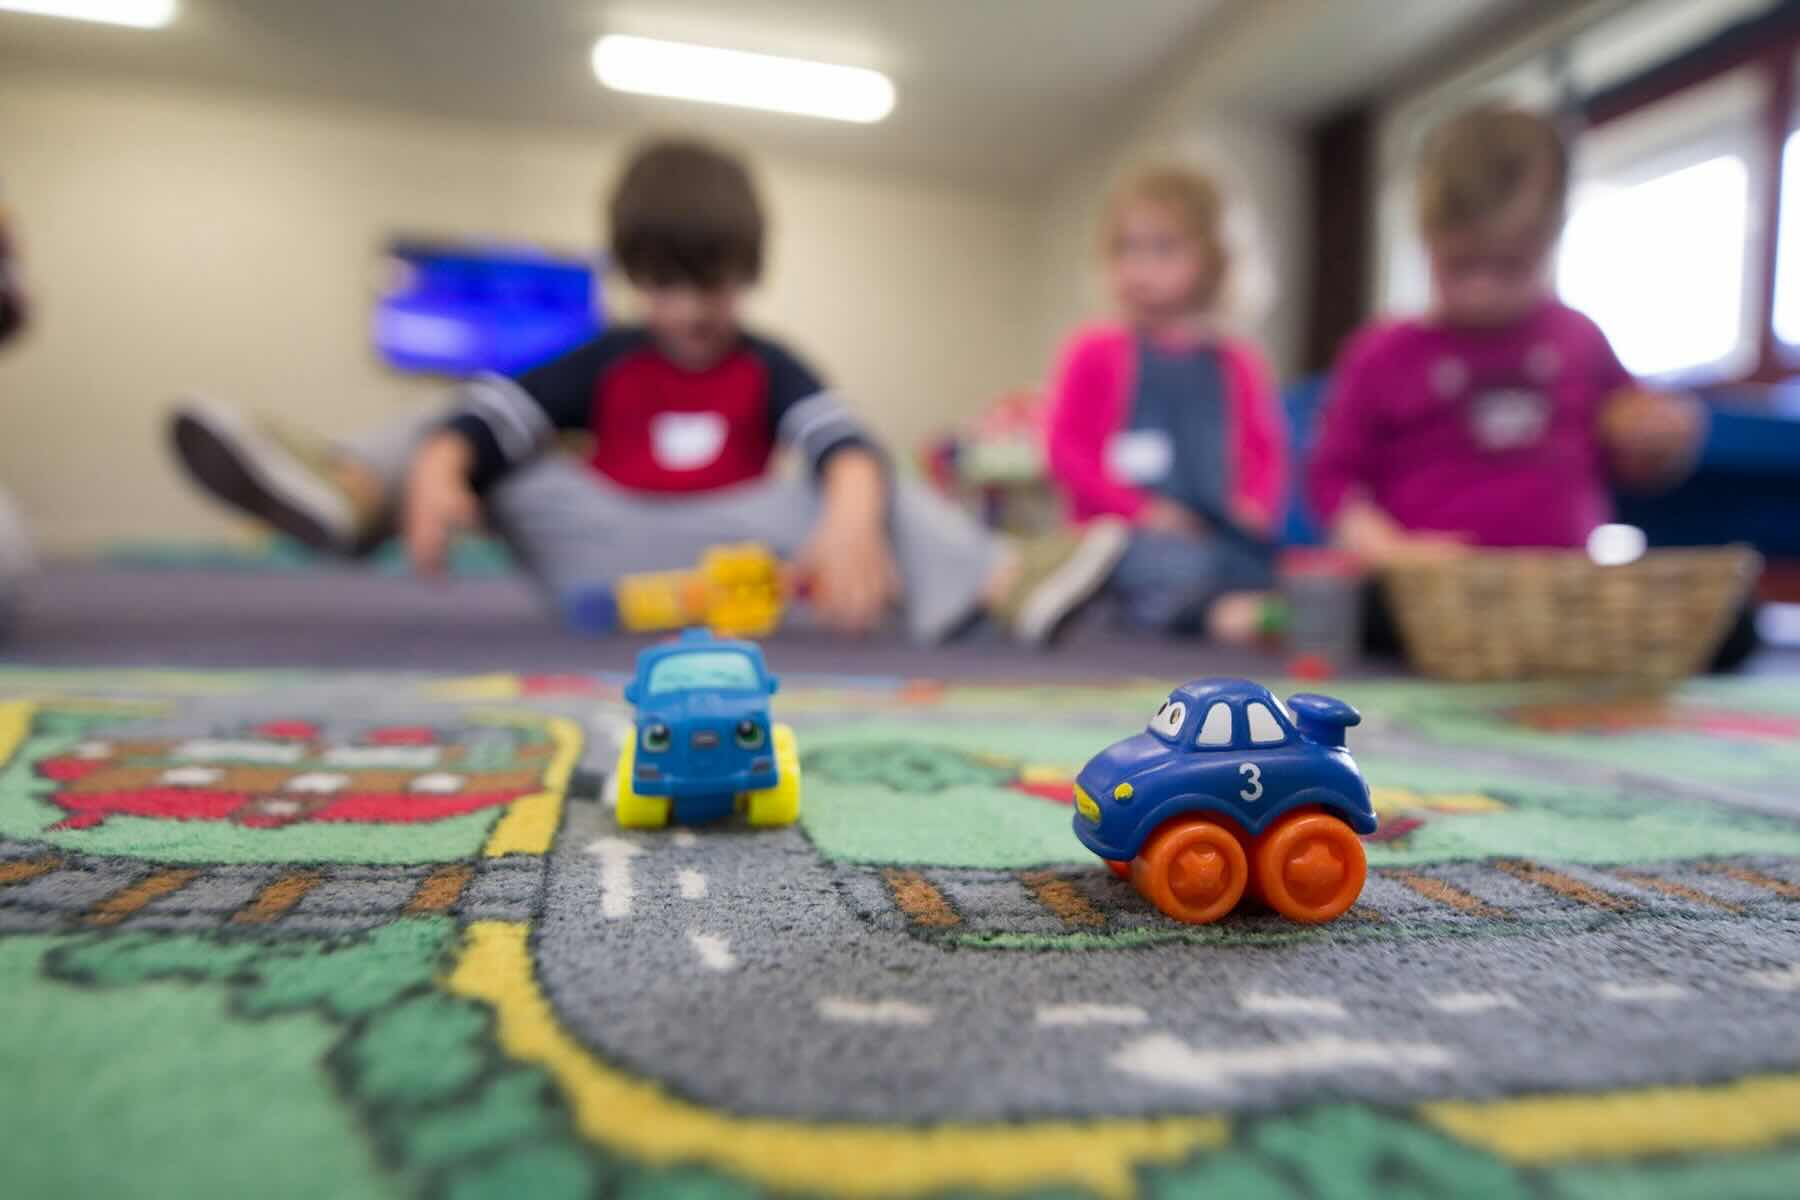 A classroom rug that has roads and train tracks with children seating around it and playing with toy cars